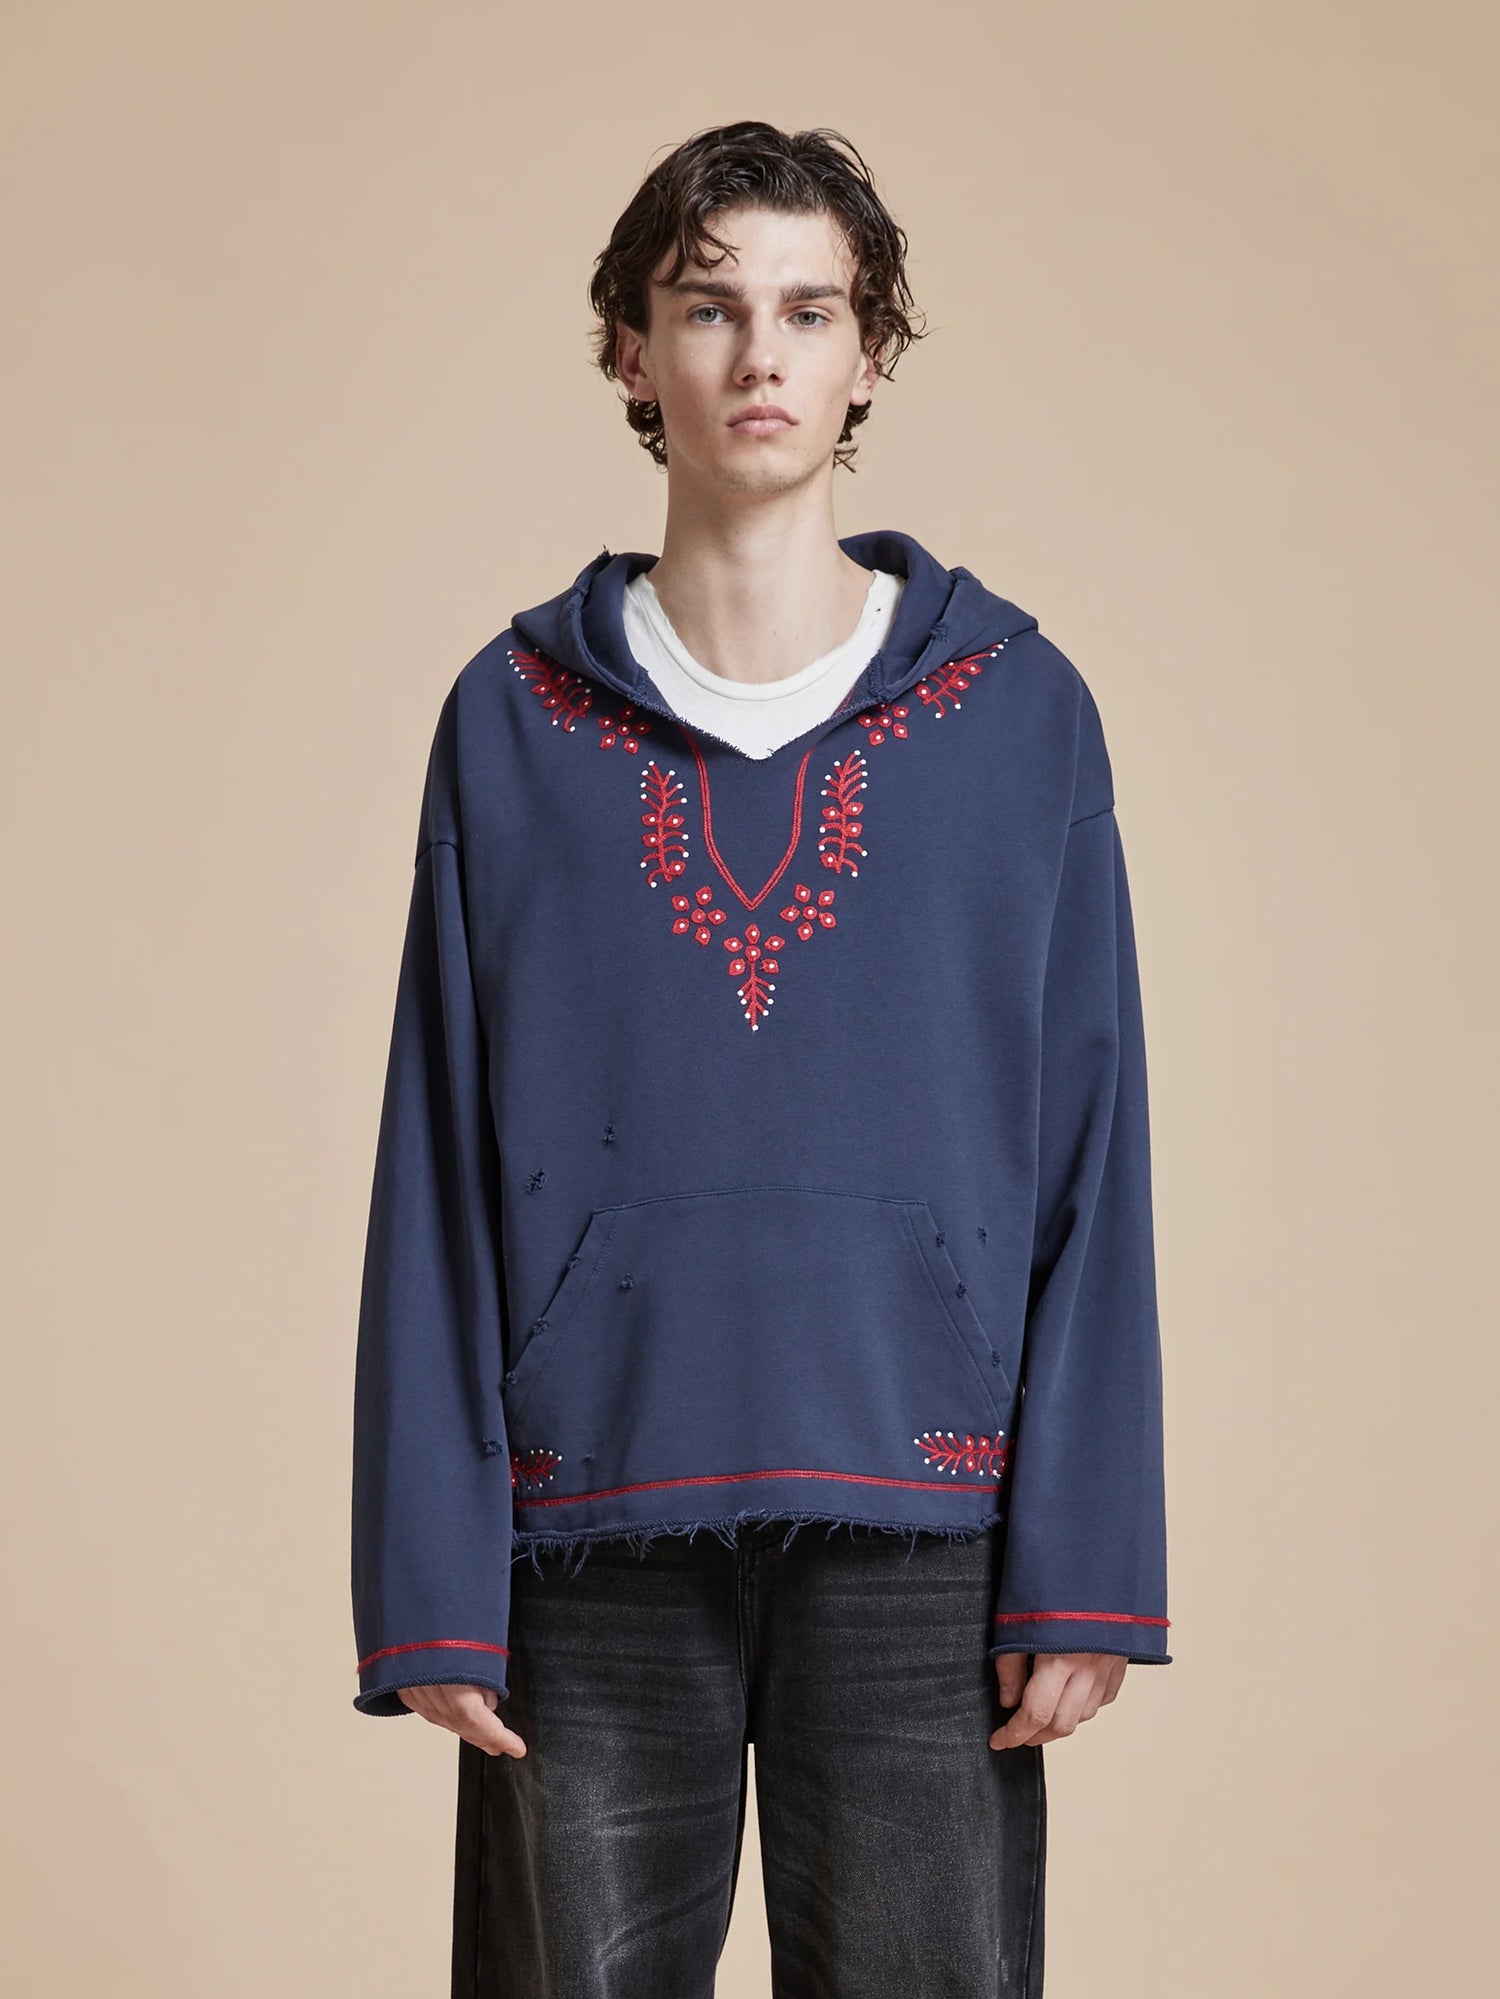 A man wearing a Found Indus Embroidered Hoodie with motifs of Phulkari embroidery in blue and red.